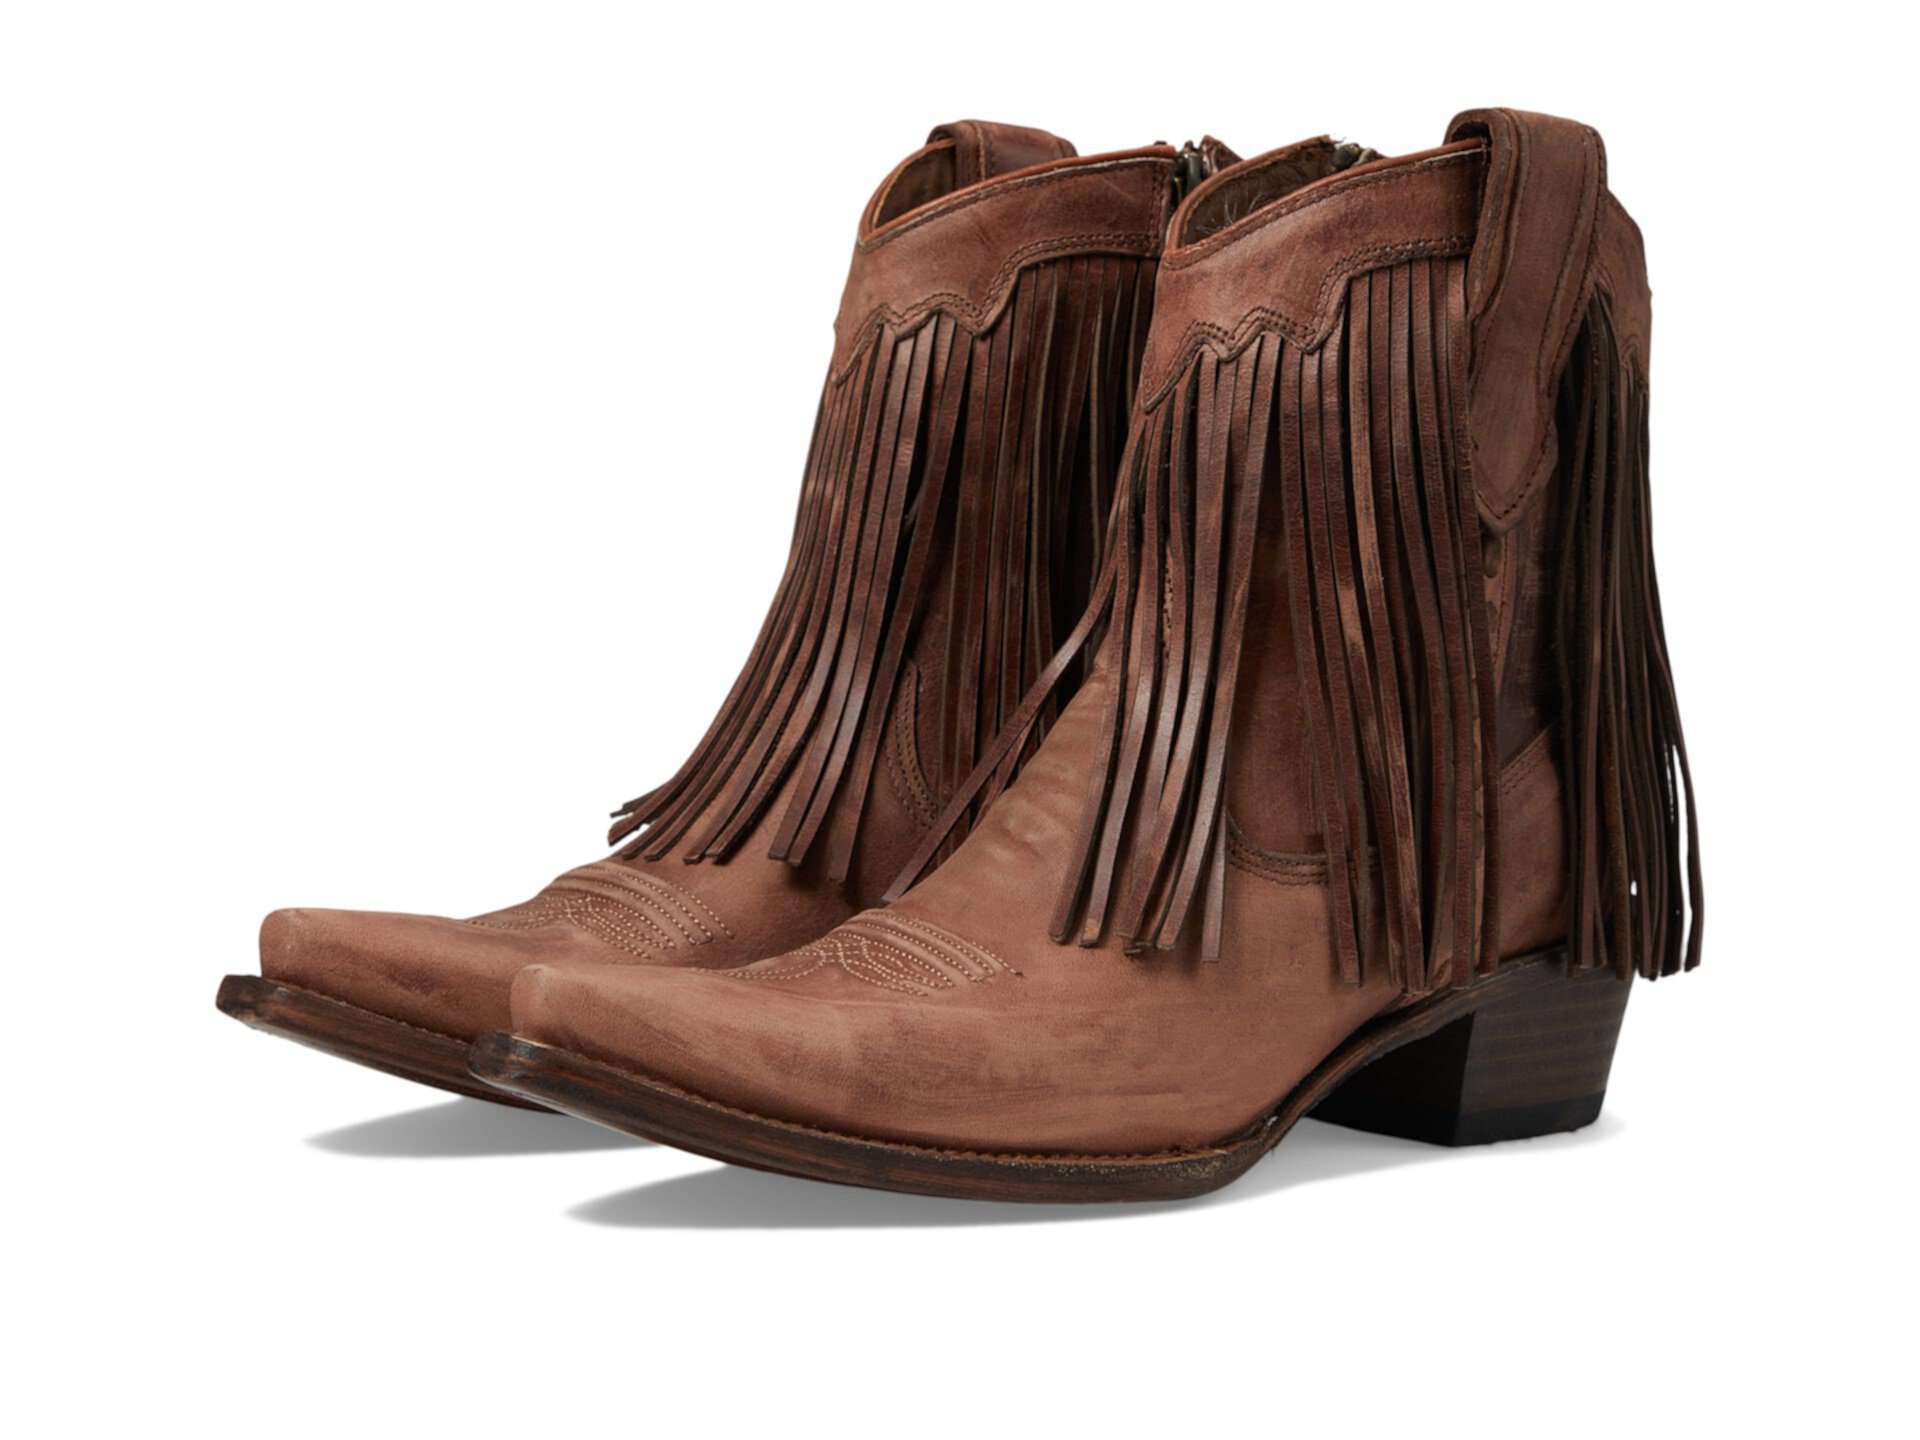 L6072 Corral Boots